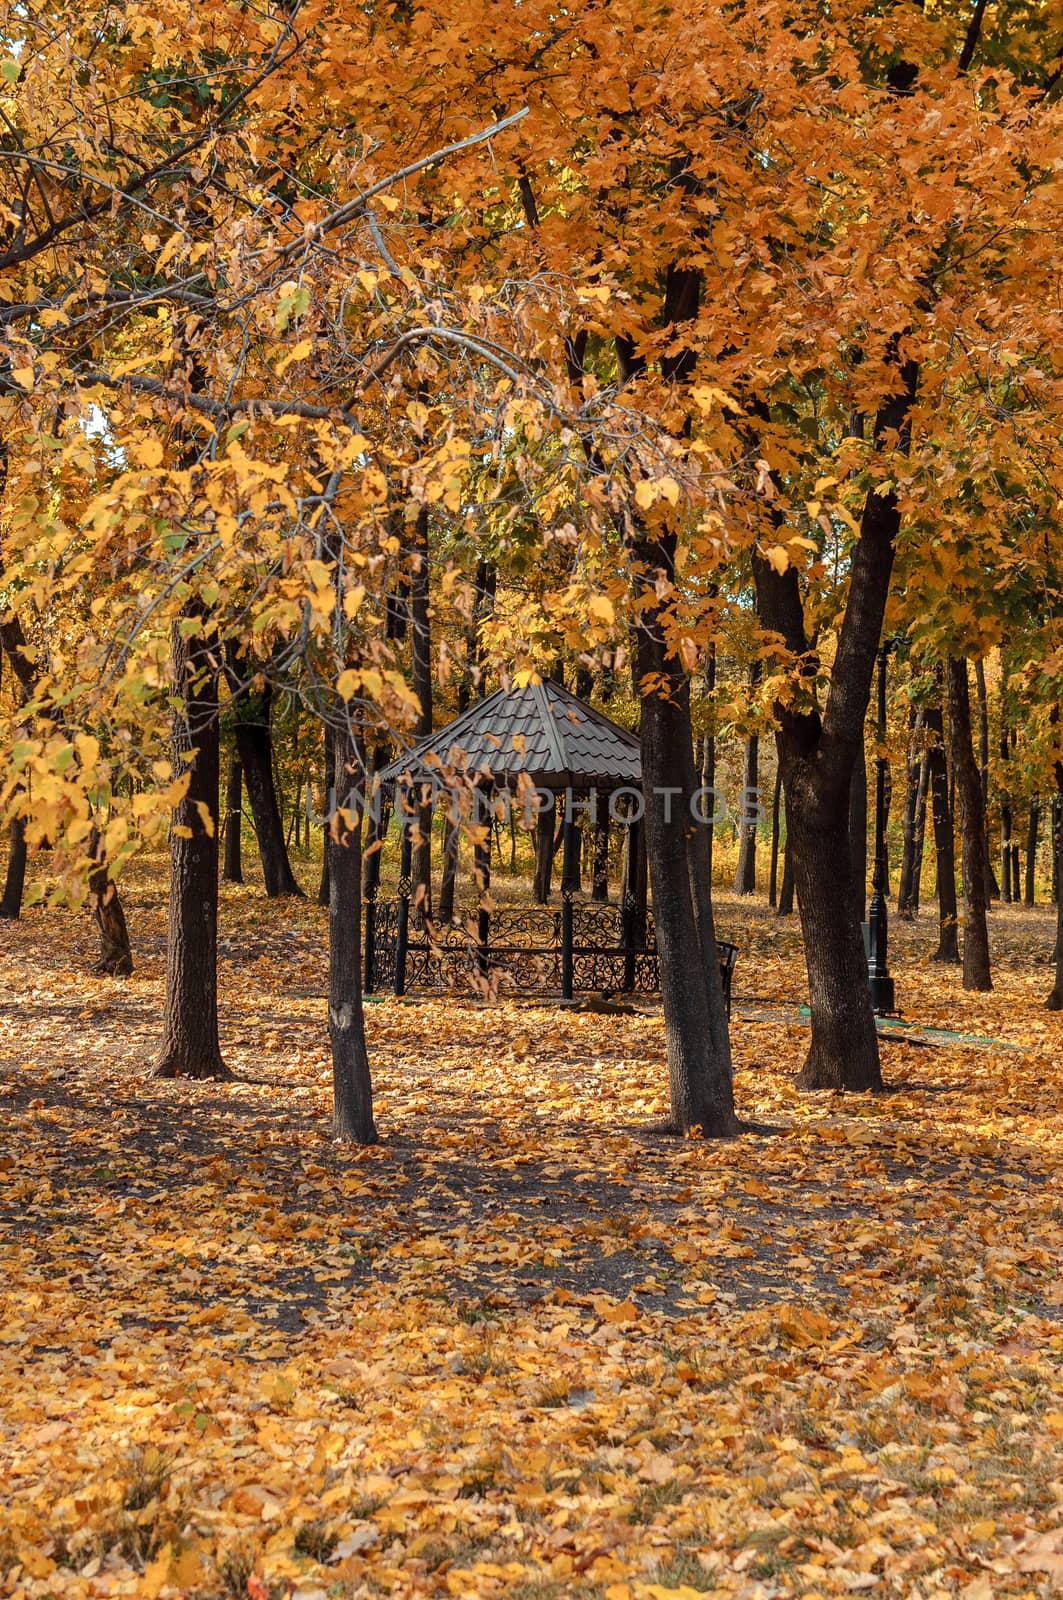 Autumn sunny landscape. The road in the park leads to the gazebo. Autumn park of trees and fallen autumn leaves on the ground in the park on a sunny October day.template for design. Copy space.